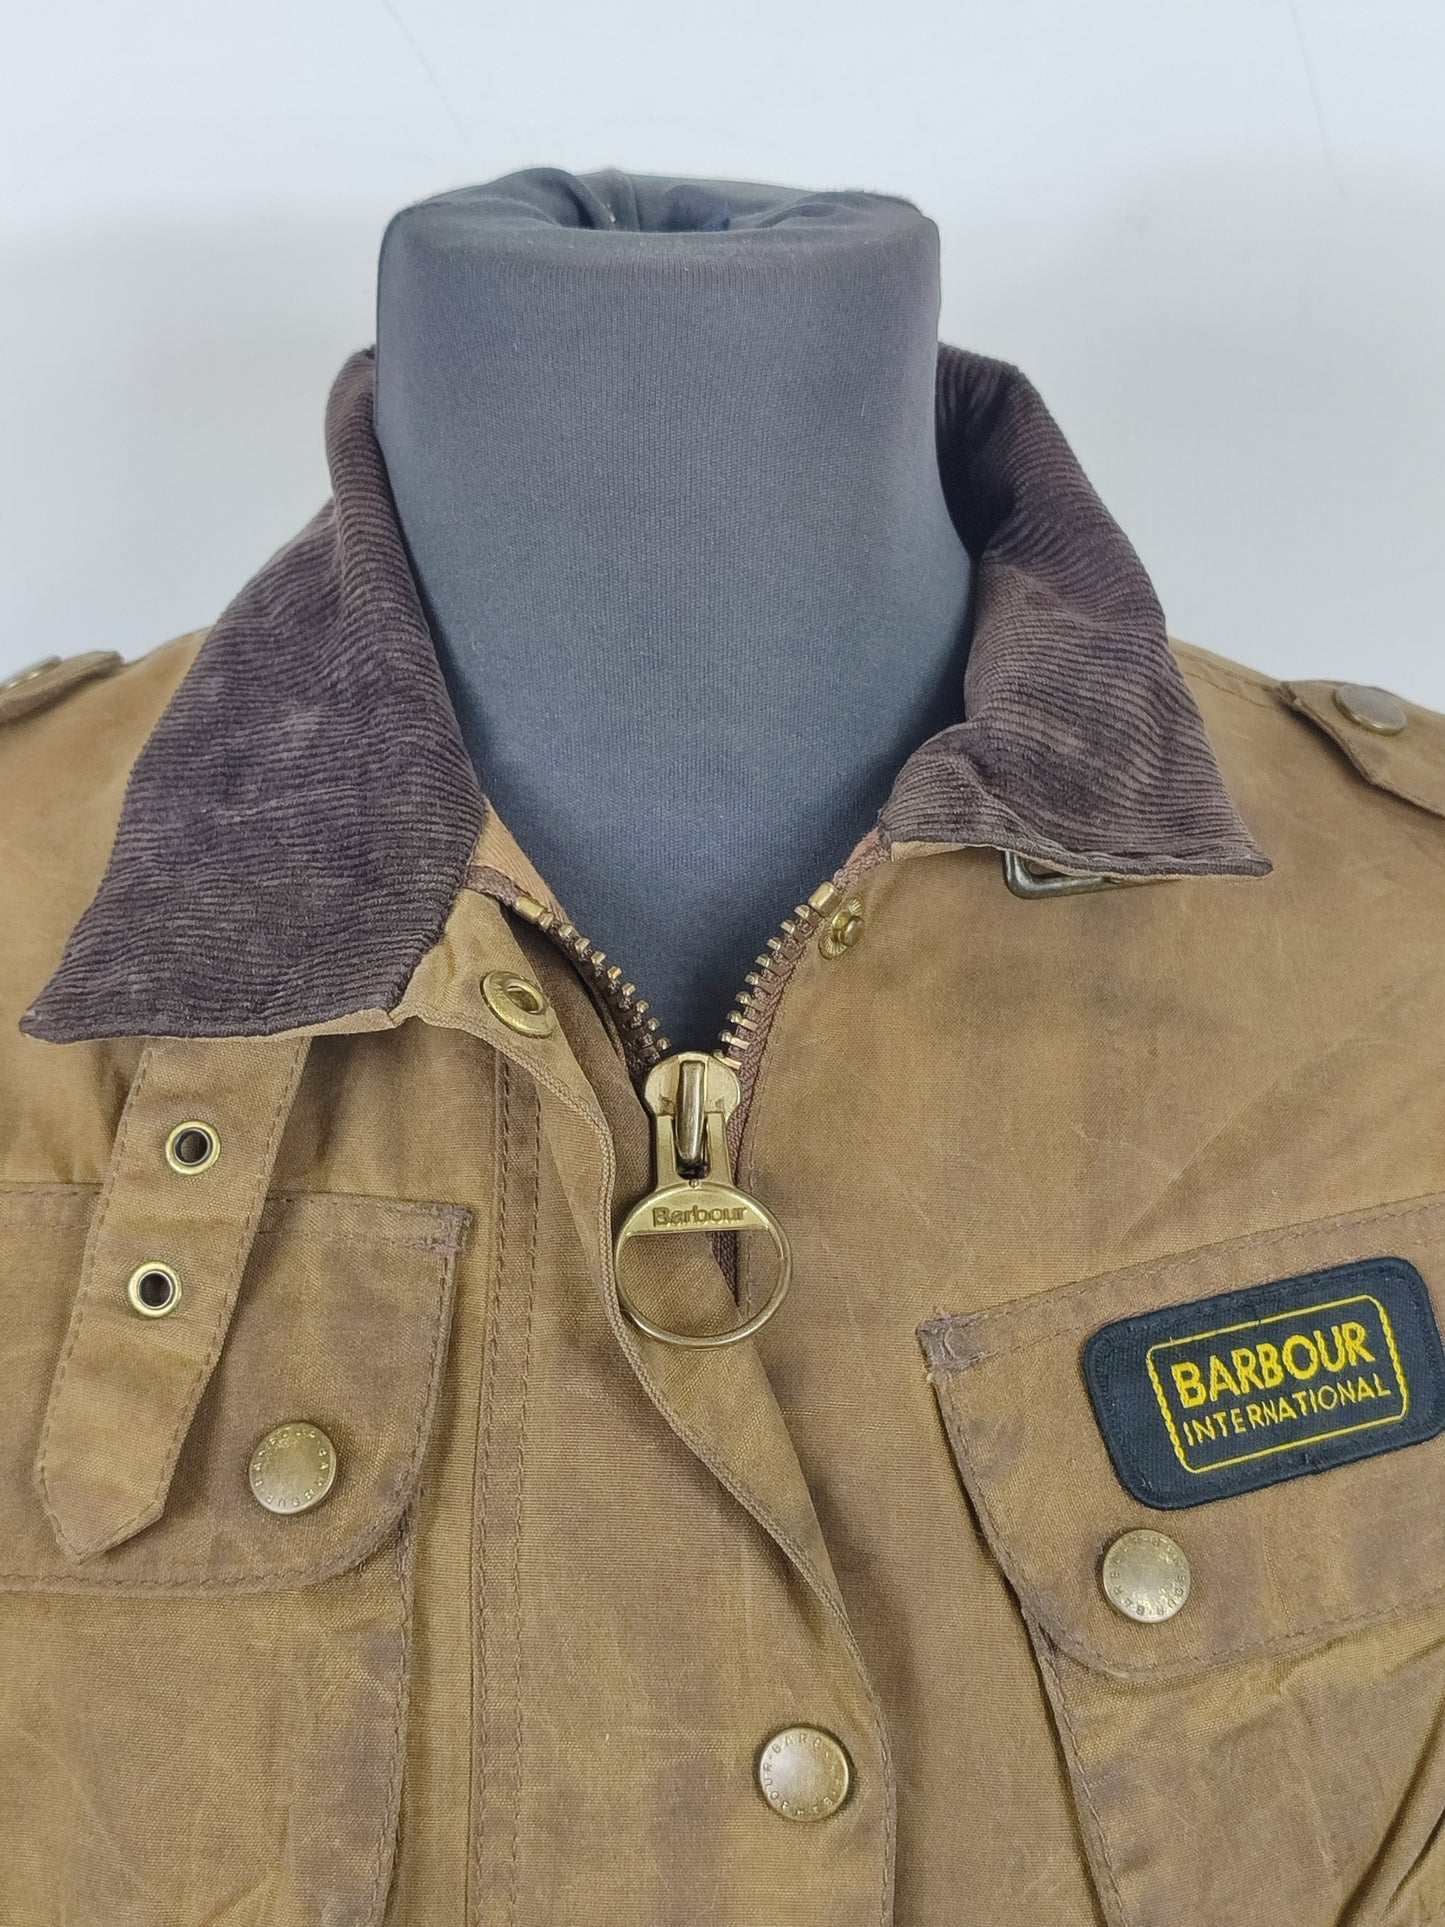 Giacca Barbour International beige Donna Xsmall UK8 -Lady International Beige Jacket UK8 Size XS